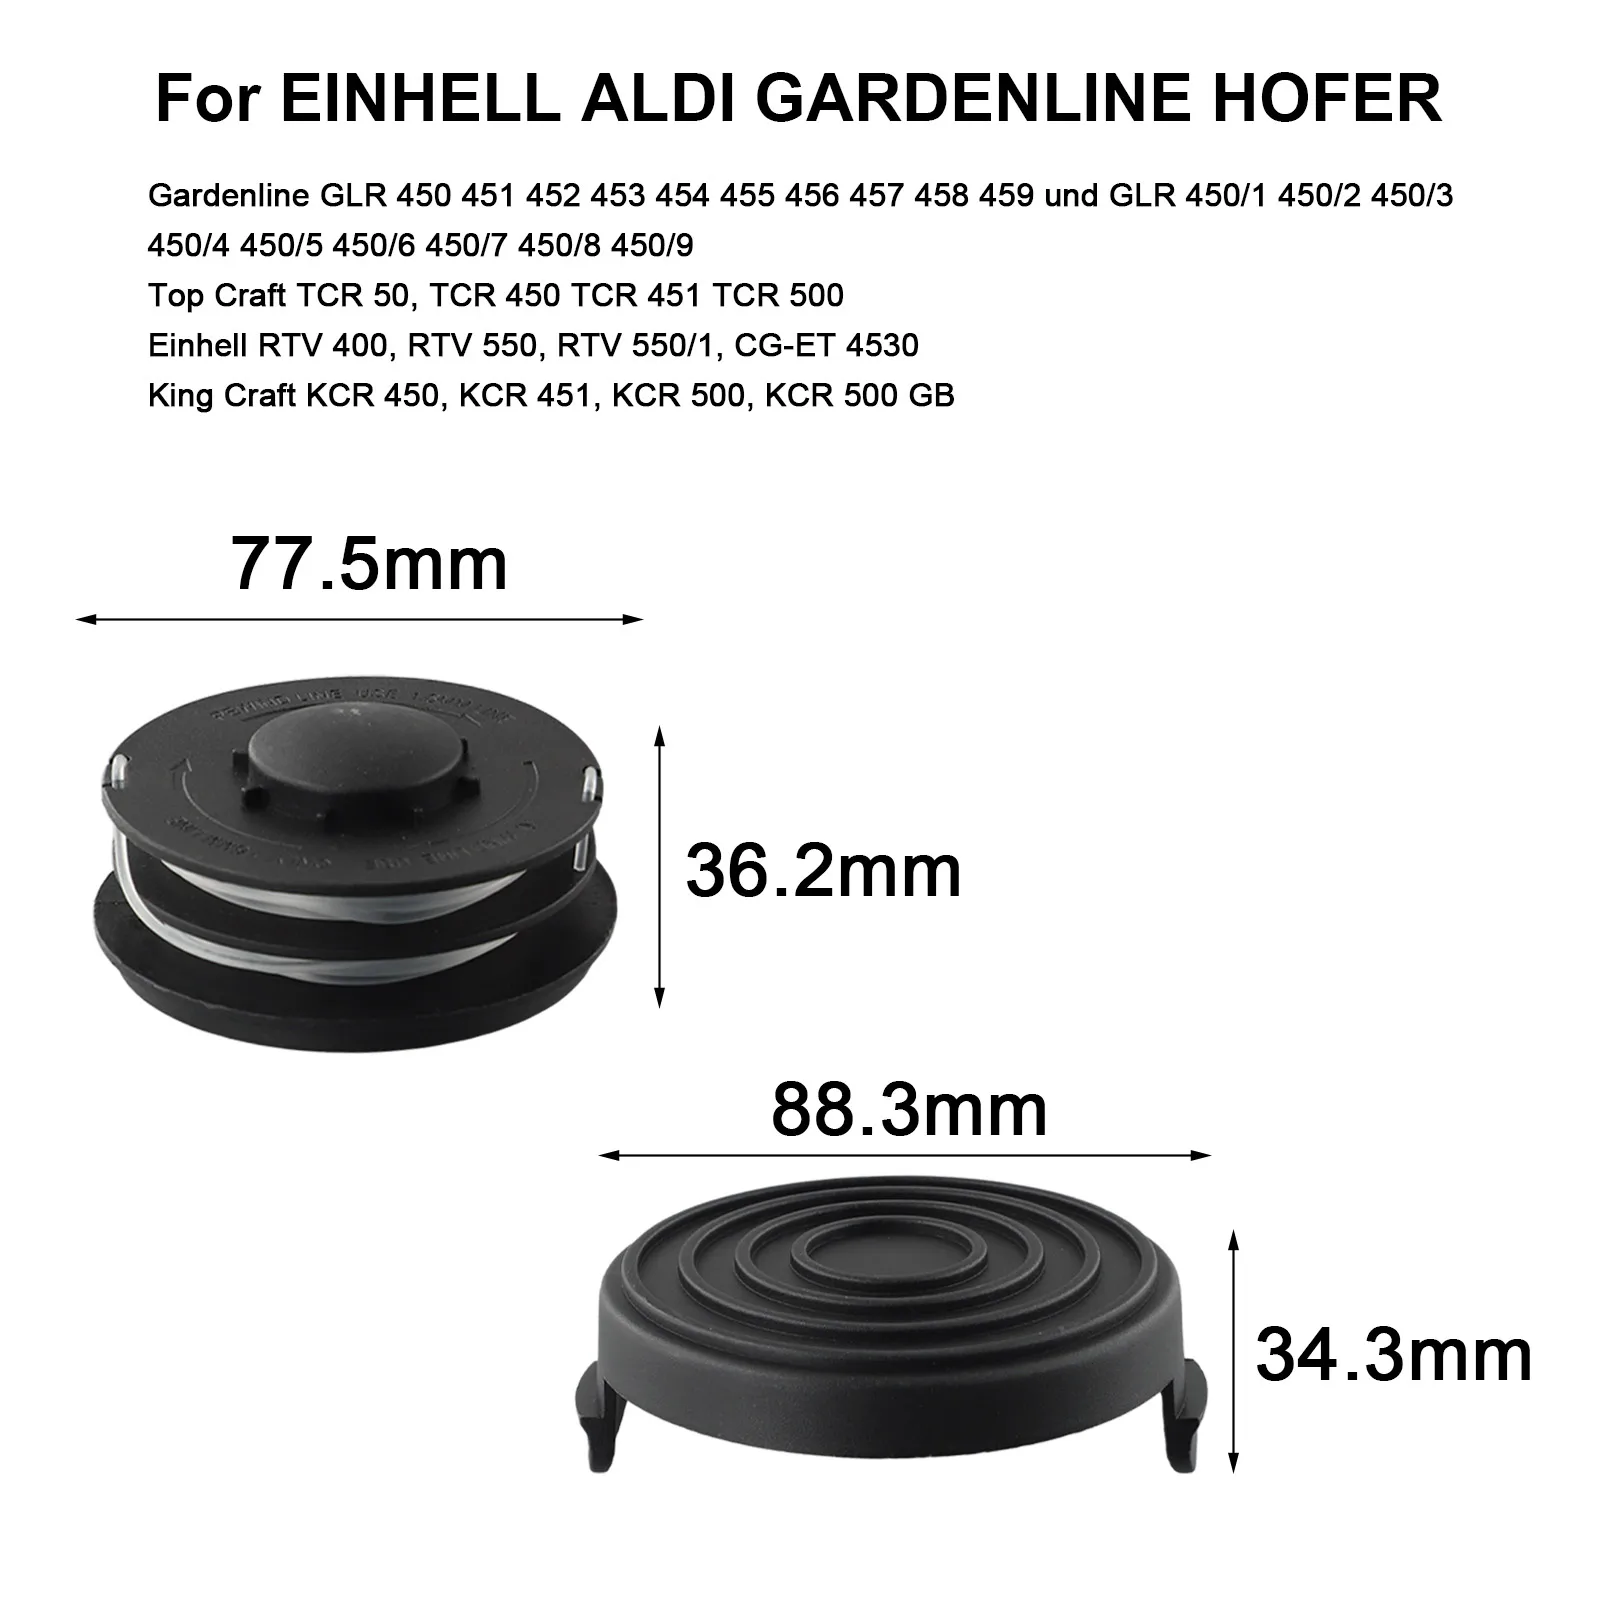 

Lawn Trimmer Cap Cover Trimmer Head Set Suitable For Einhell GC-ET 4530 3405685 Spools Grass Trimmer Lawn Mower Replacement